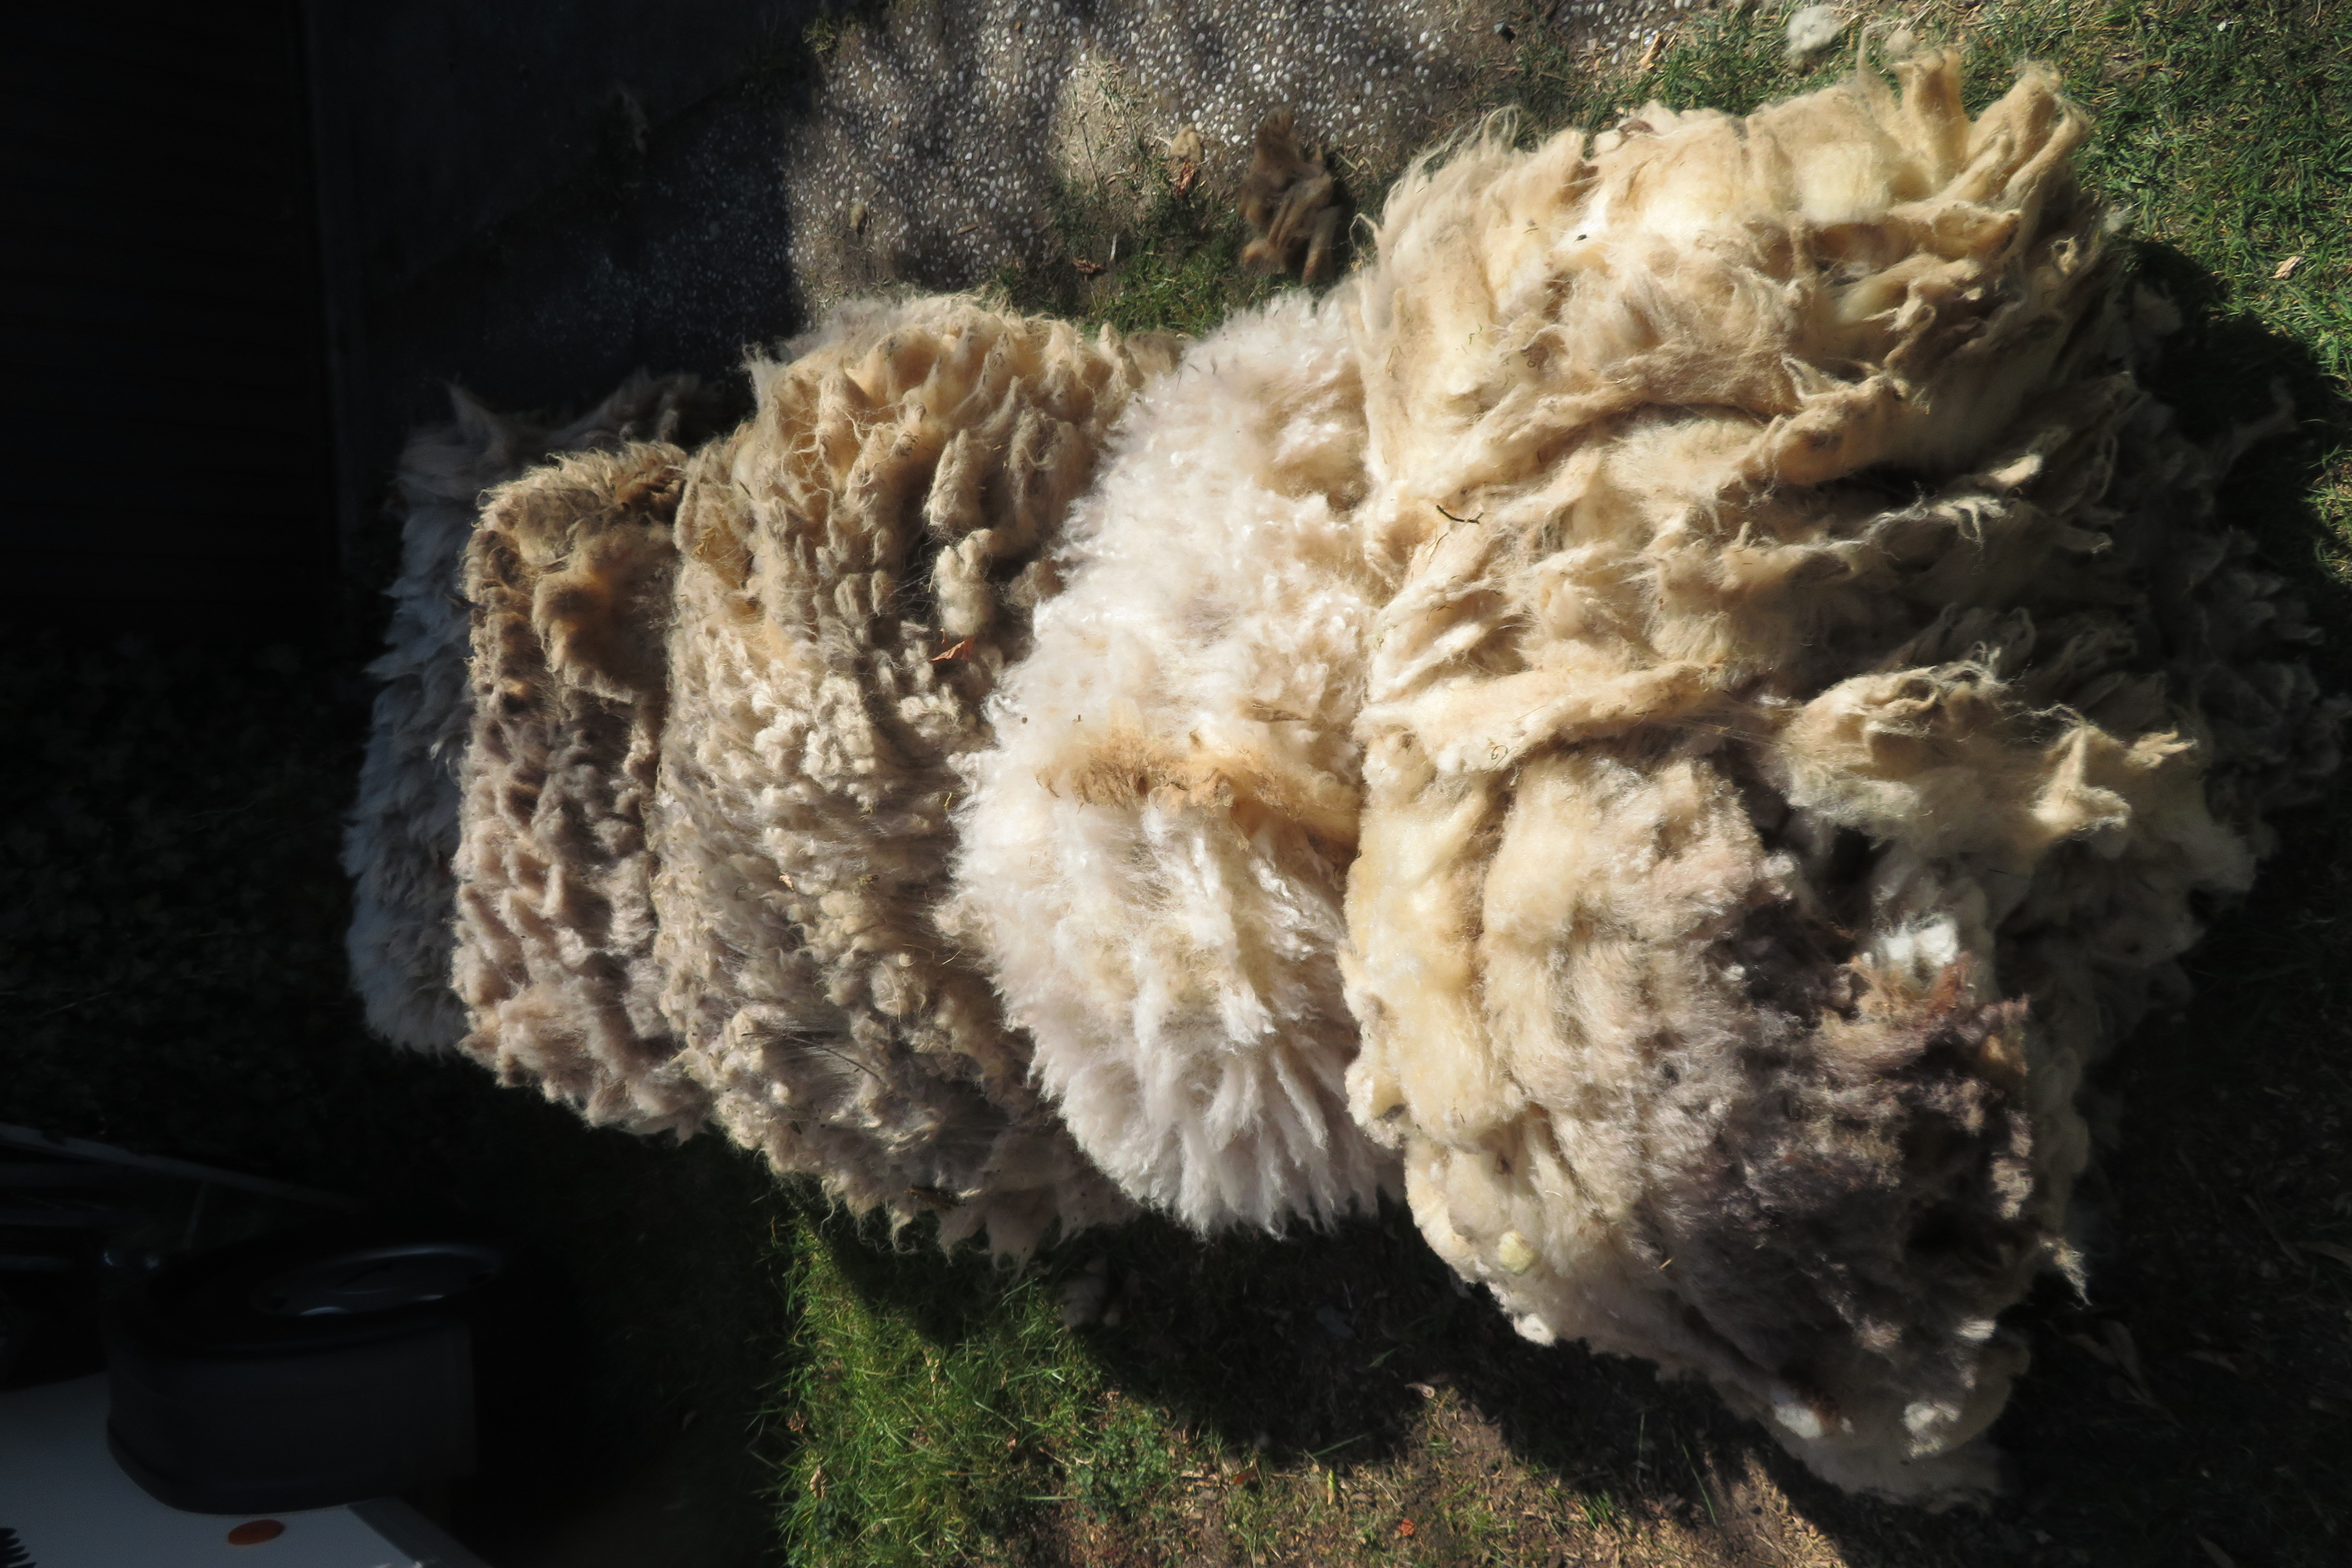 A swatch for a Shepherd 4, 5 fleeces-one year's harvest